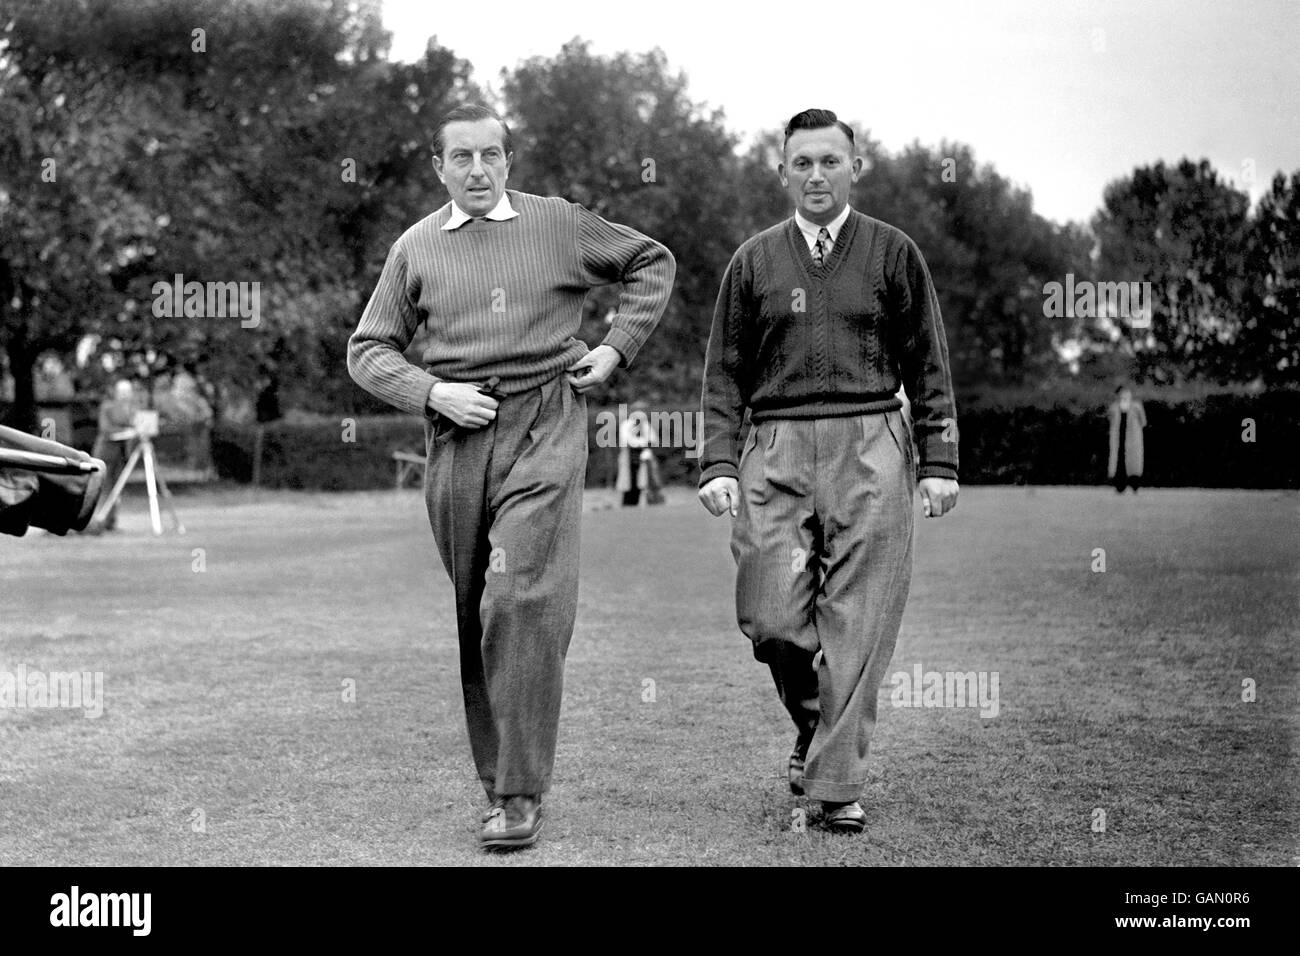 Golf - Ryder Cup - Pre-Tournament Practice - Great Britain and Ireland v Oxford and Cambridge Golfing Society. Henry Cotton (left) and Arthur Lees of the Great Britain and Ireland Ryder Cup team Stock Photo